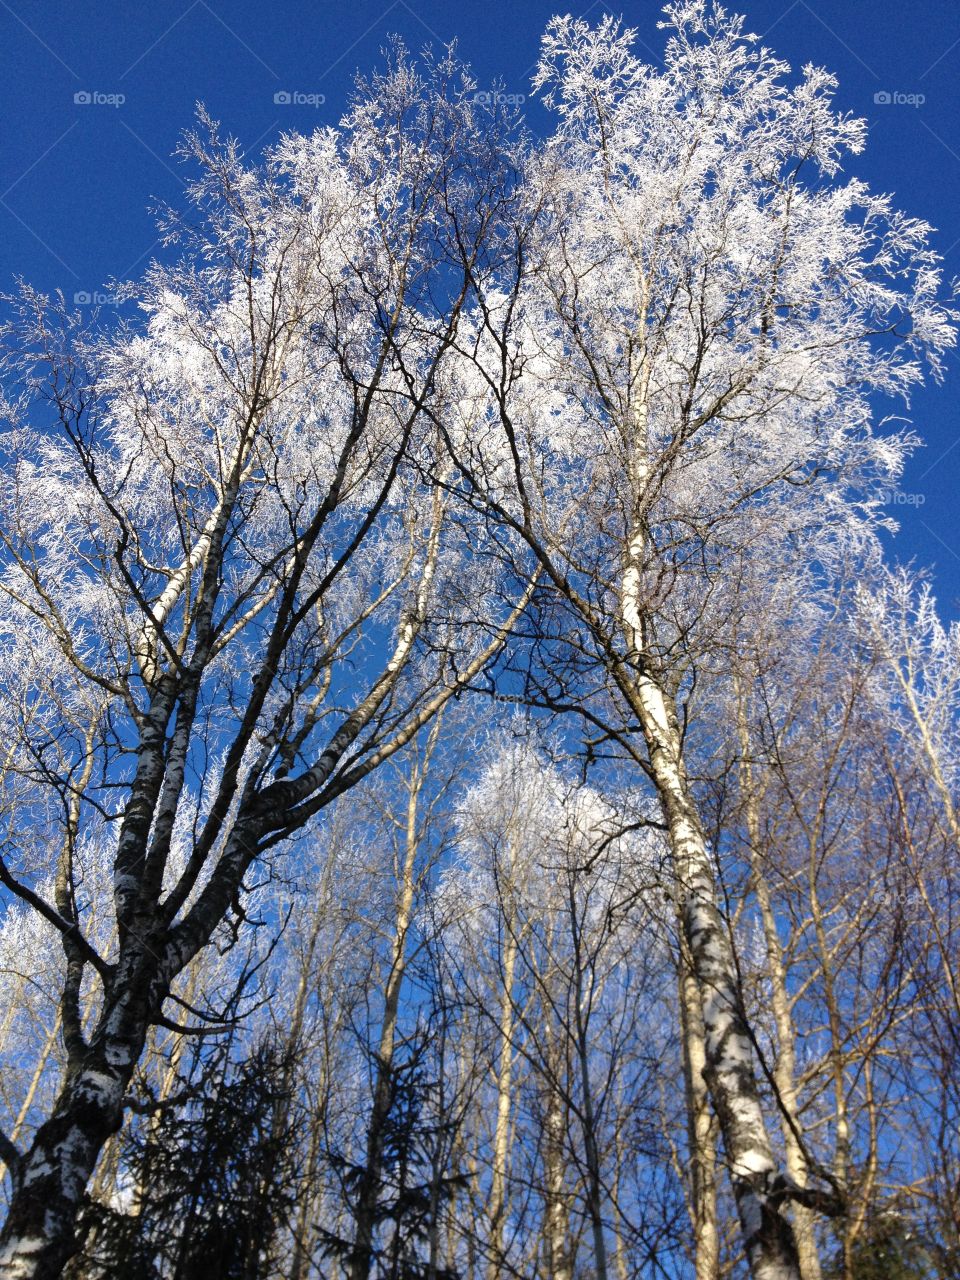 Crystalsong forest. Frozen trees and blue sky.